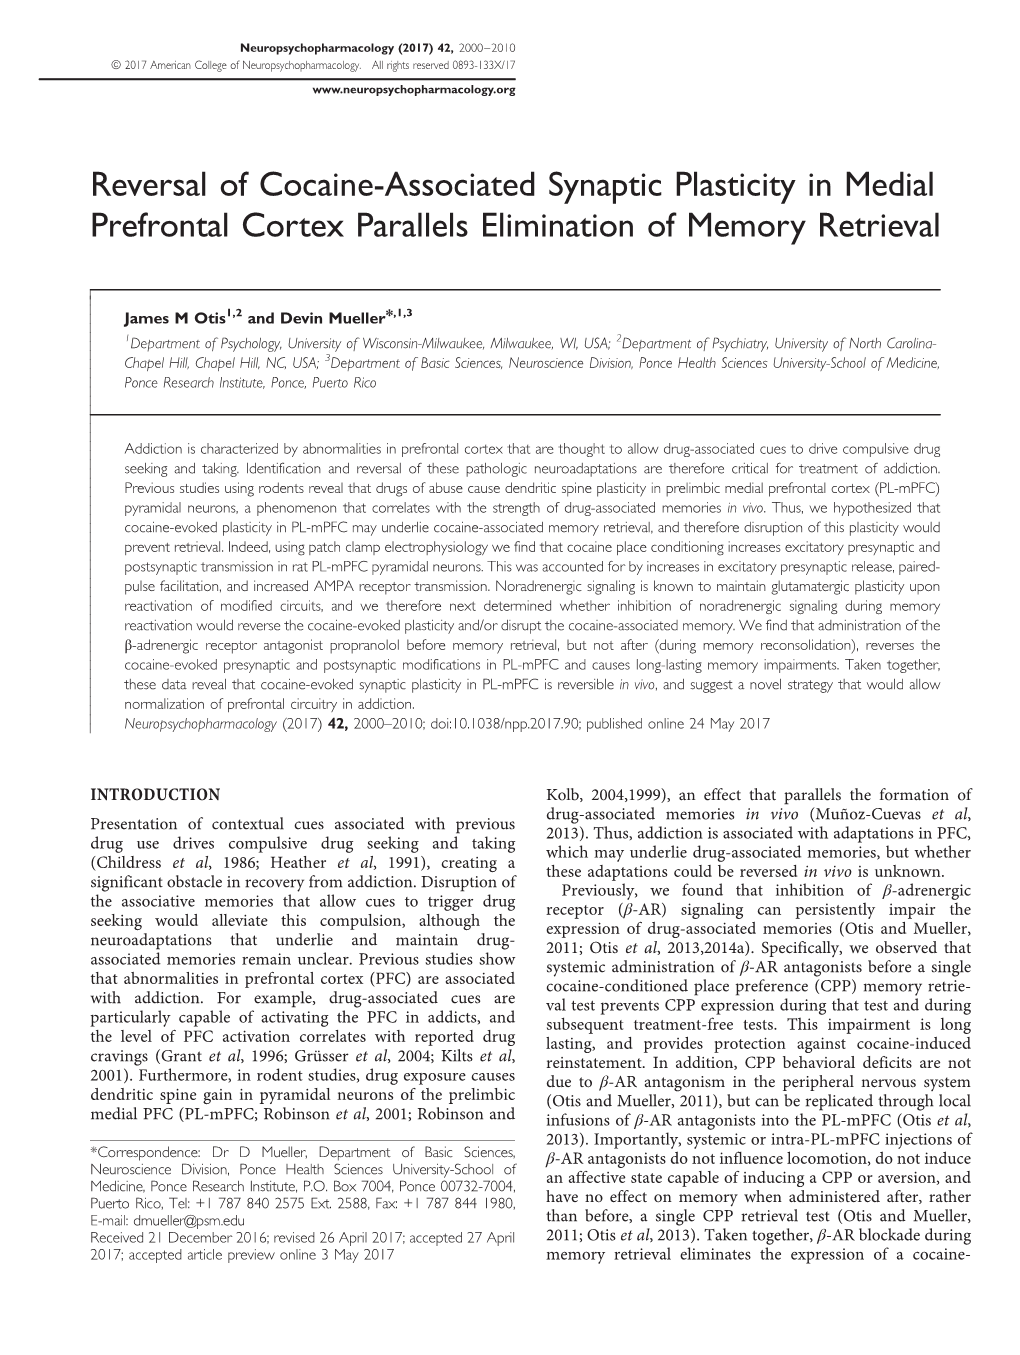 Reversal of Cocaine-Associated Synaptic Plasticity in Medial Prefrontal Cortex Parallels Elimination of Memory Retrieval